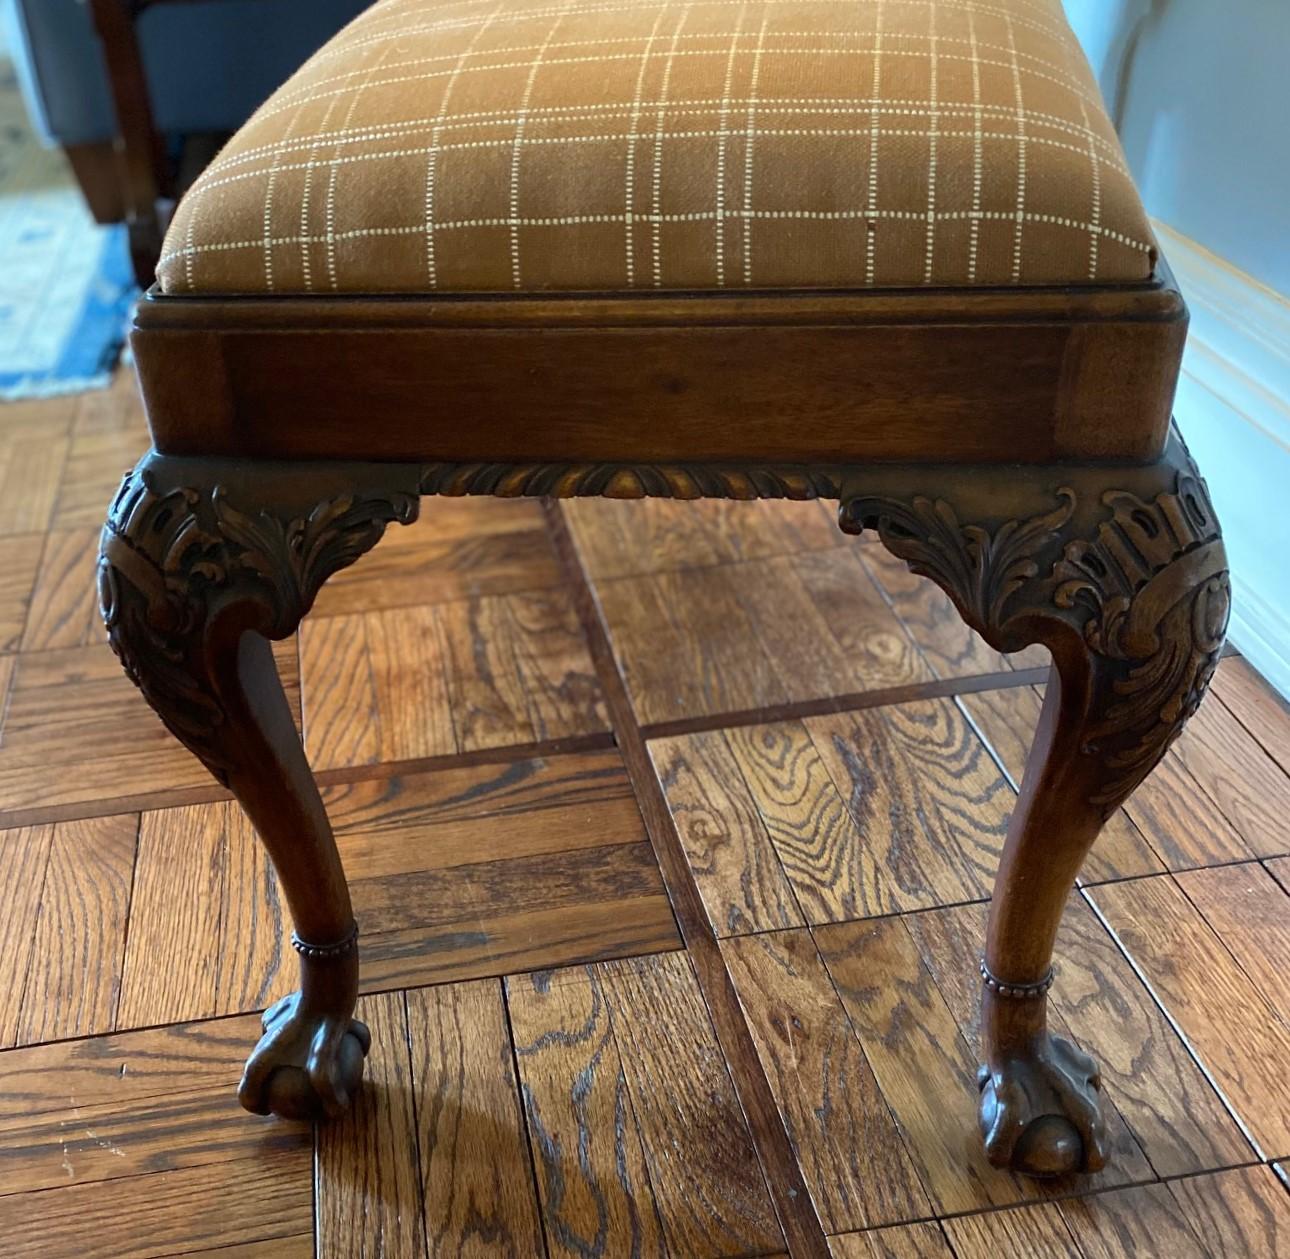 20th c., finely detailed American-made mahogany Chippendale bench by The Company of Master Craftsmen, New York, c. 1926. Carved knees with ball-and-claw feet. The detailing is crisply executed. Please note the carved beaded rings encircling the legs